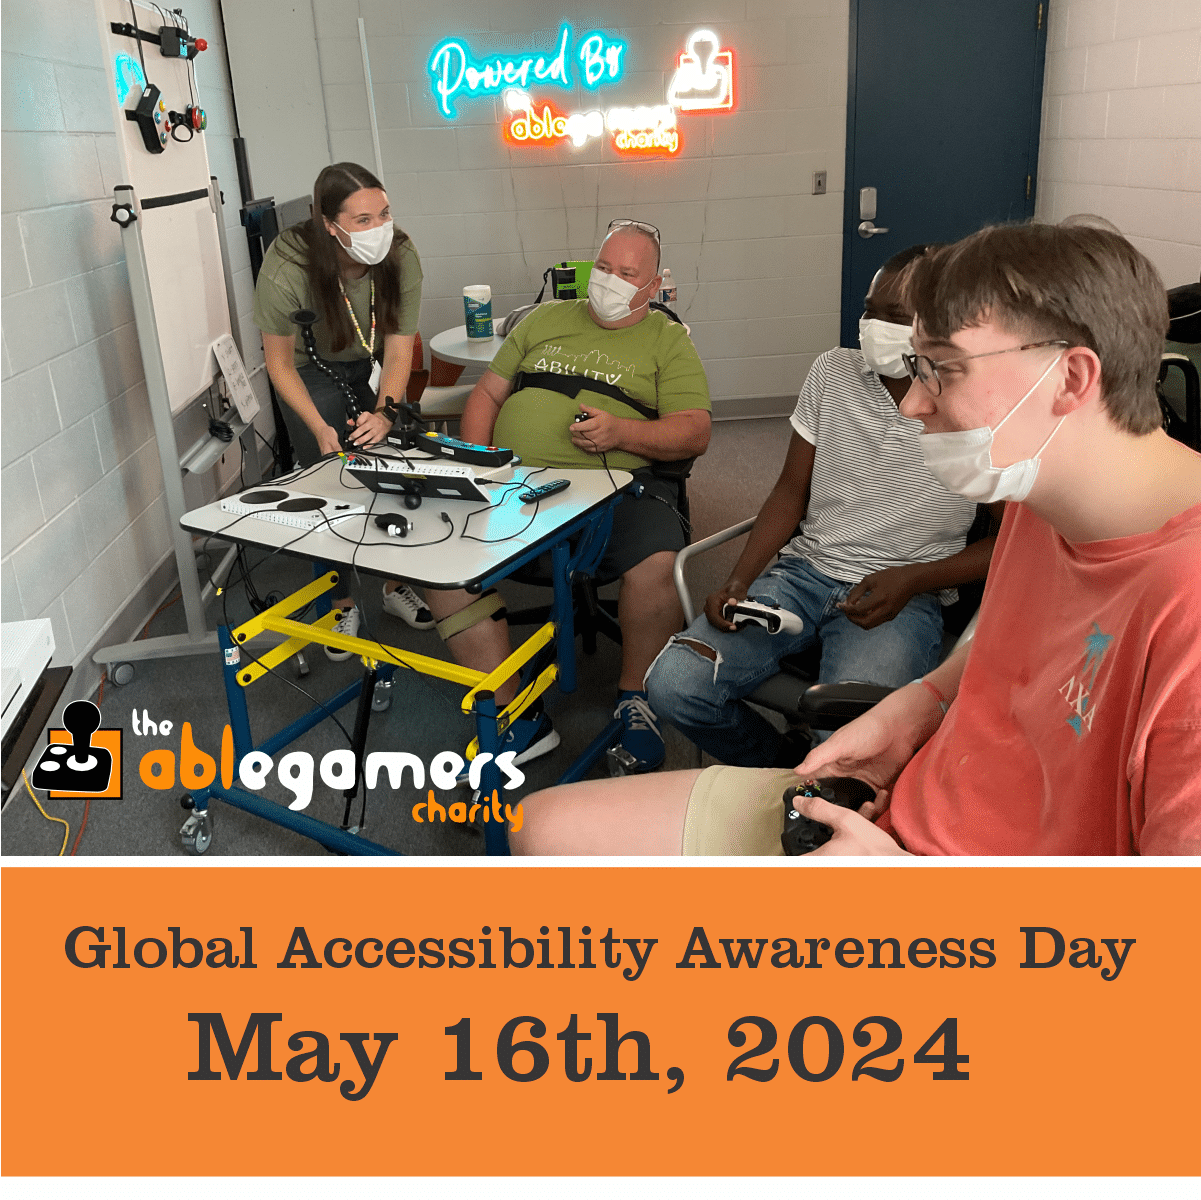 Three individuals playing a video game together and another indivdual standing in the background at Powered by AbleGamers partner Ability KC- Global Accessibility Awareness Day May 16, 2024